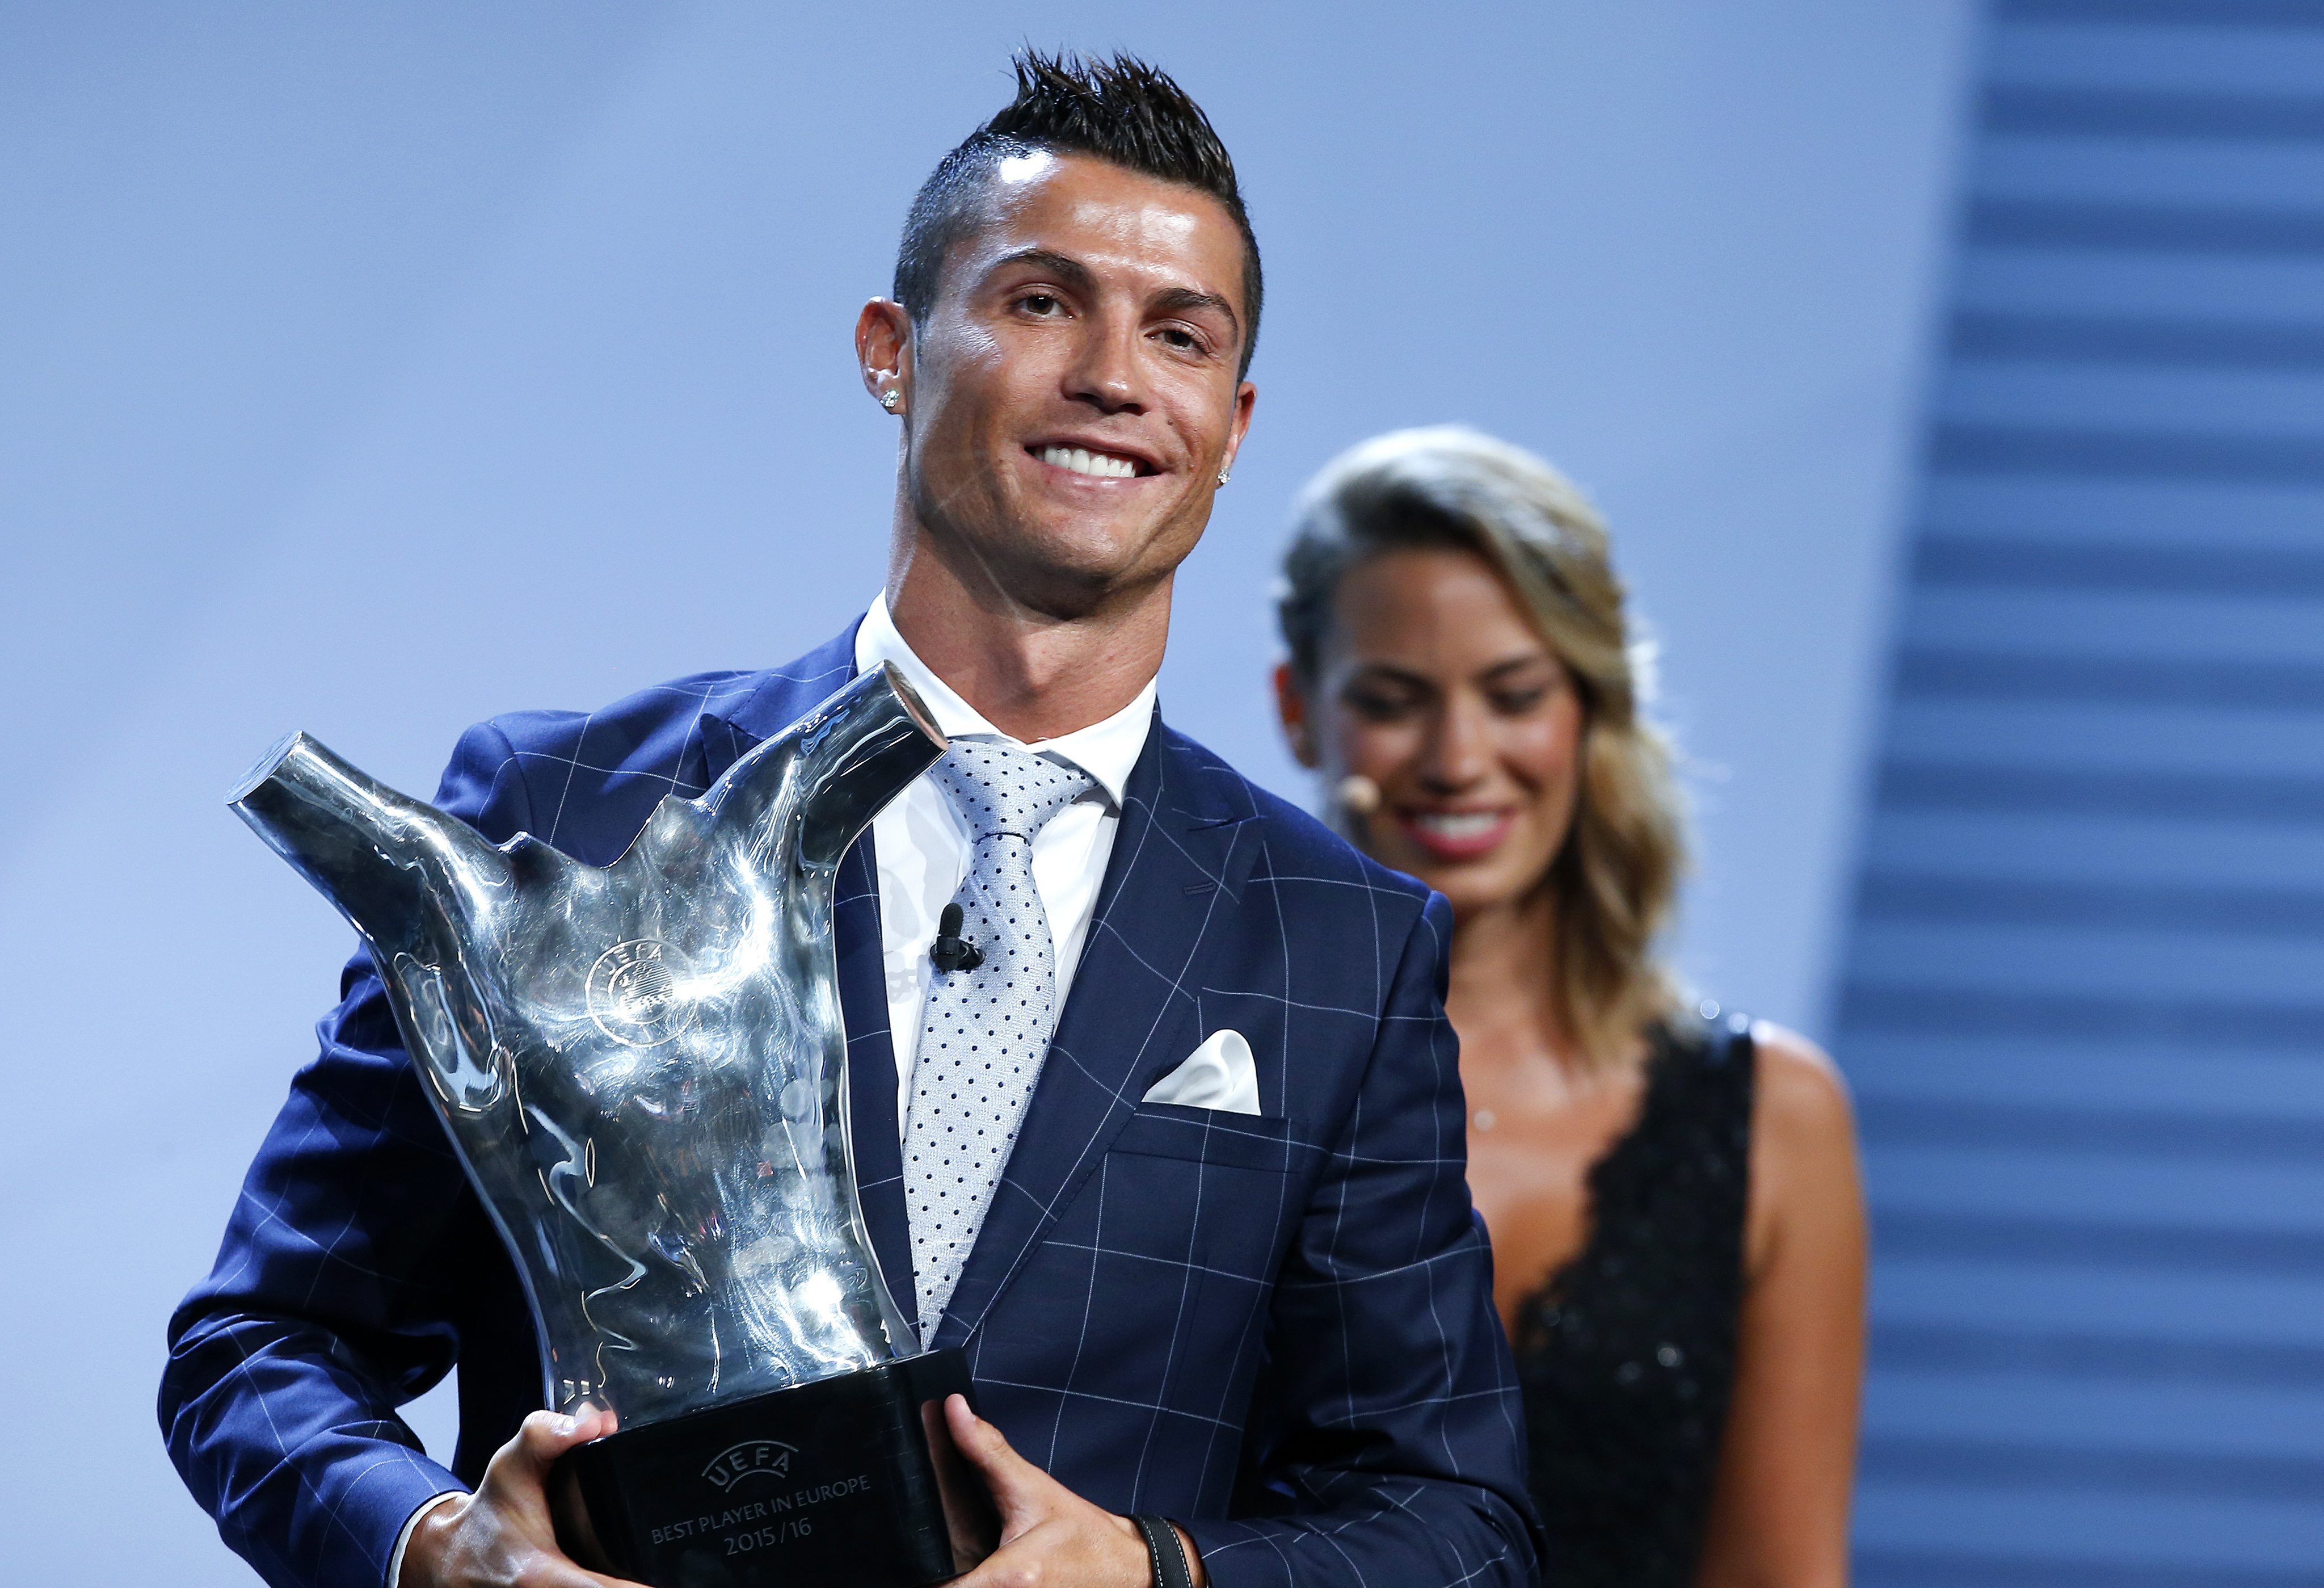 2016-08-25 19:15:35 epa05509989 epa05509982 Portuguese player Cristiano Ronaldo of Real Madrid poses with his UEFA's Best Player in Europe 2015/2016 award at Grimaldi Forum, Monte Carlo, Monaco, 25 August 2016. EPA/SEBASTIEN NOGIER EPA/SEBASTIEN NOGIER